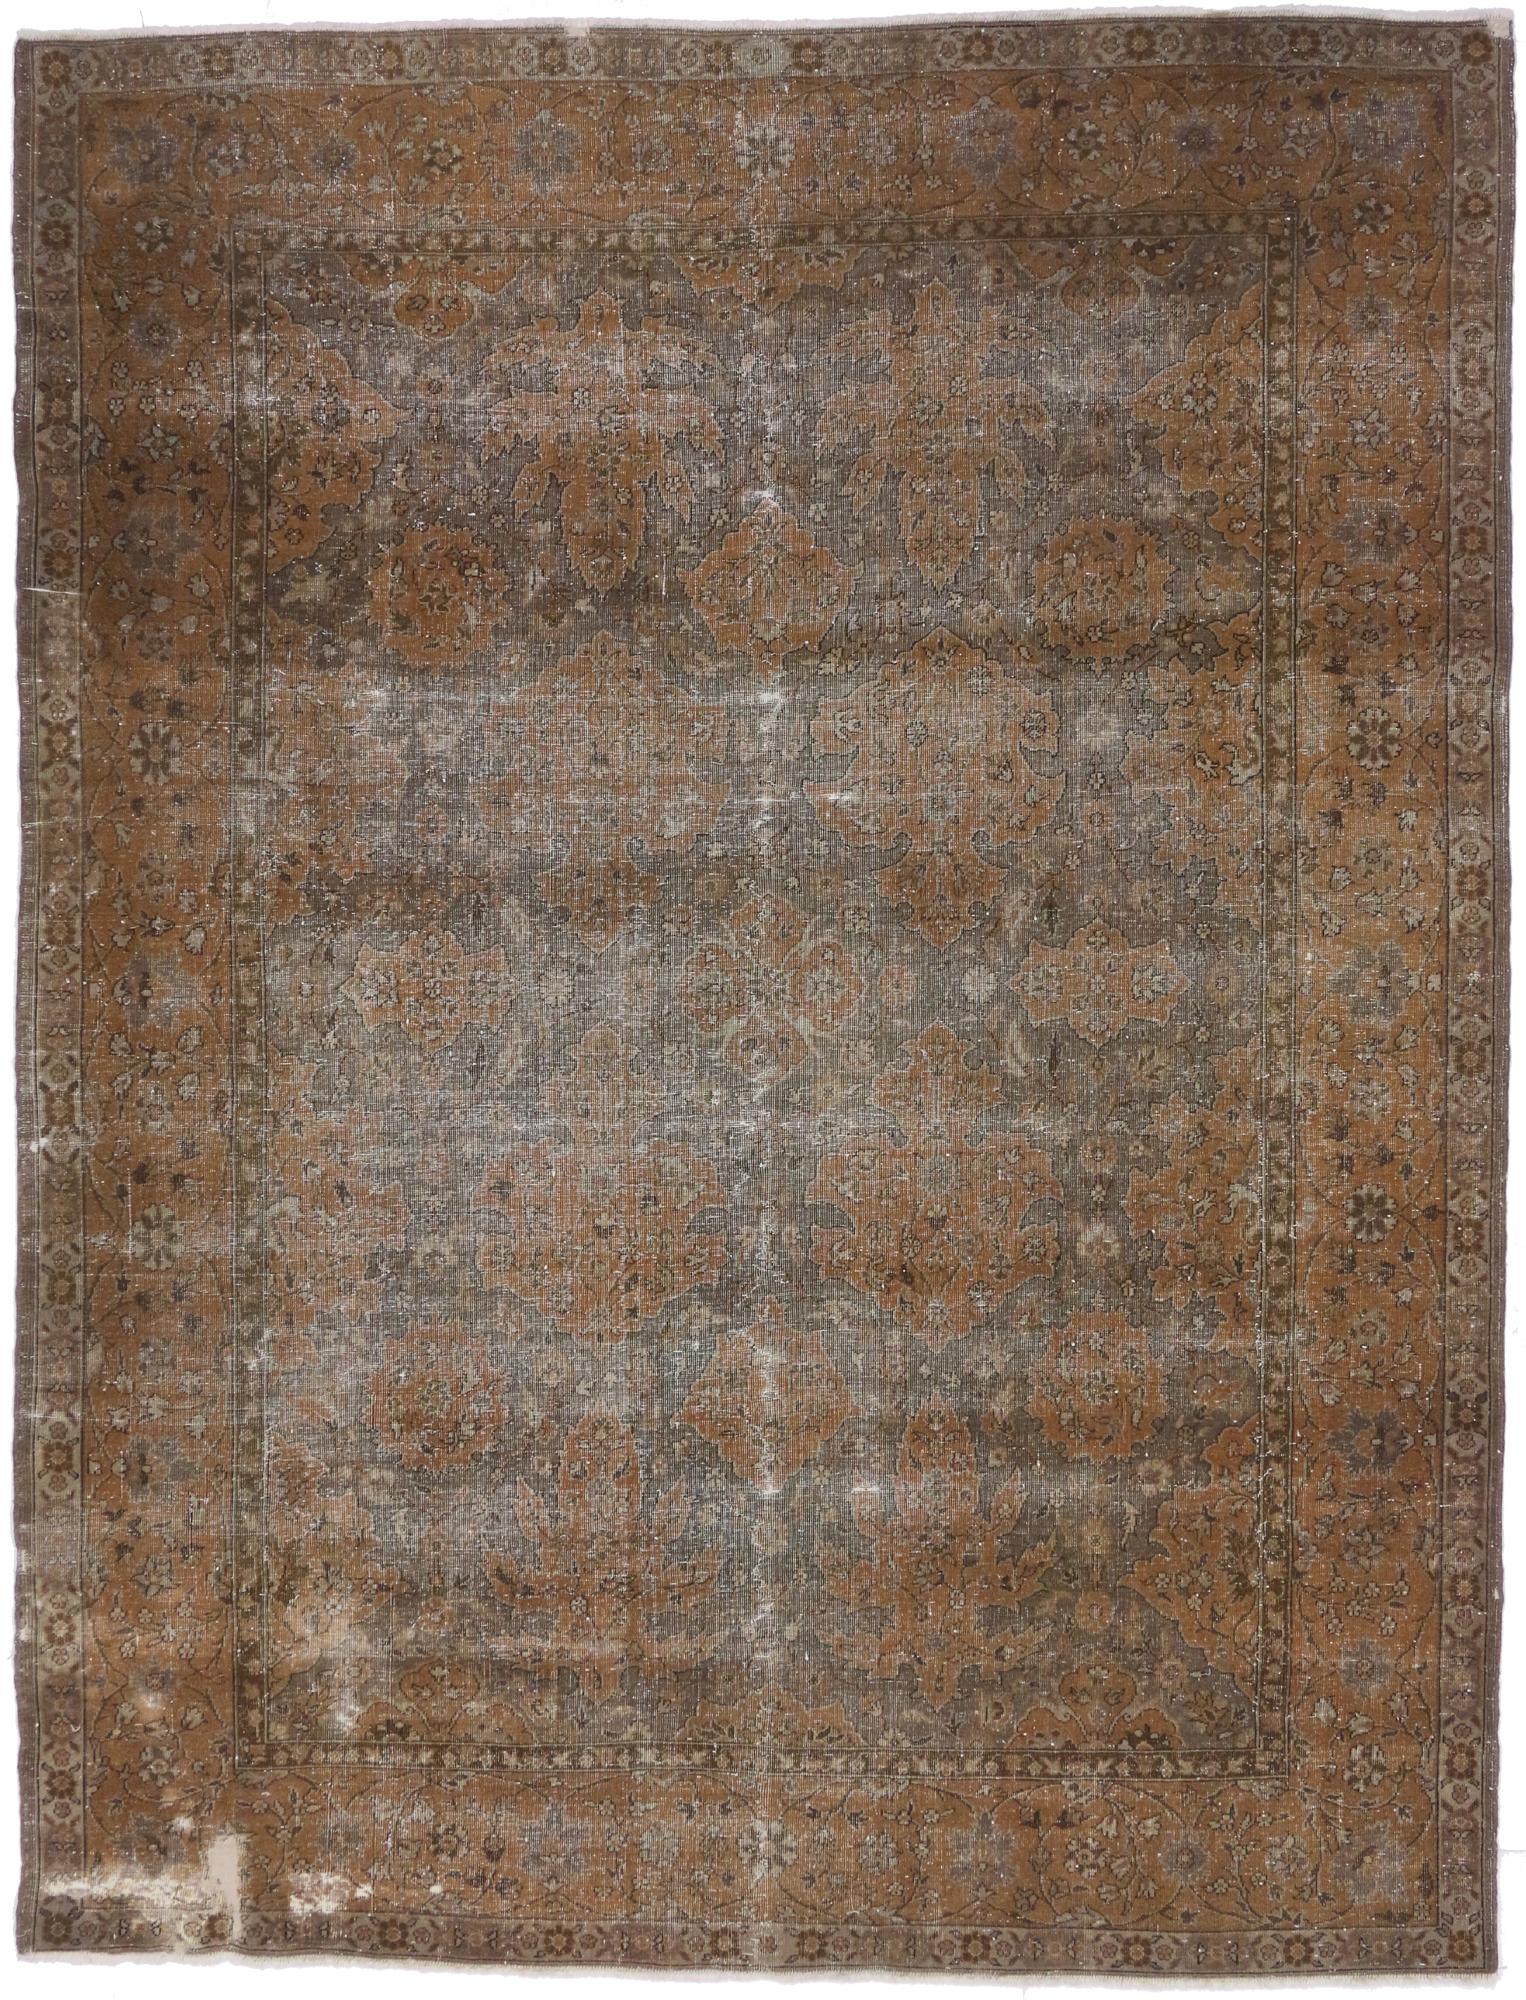 Distressed Antique Turkish Sparta Area Rug with Industrial Machine Age Style 7